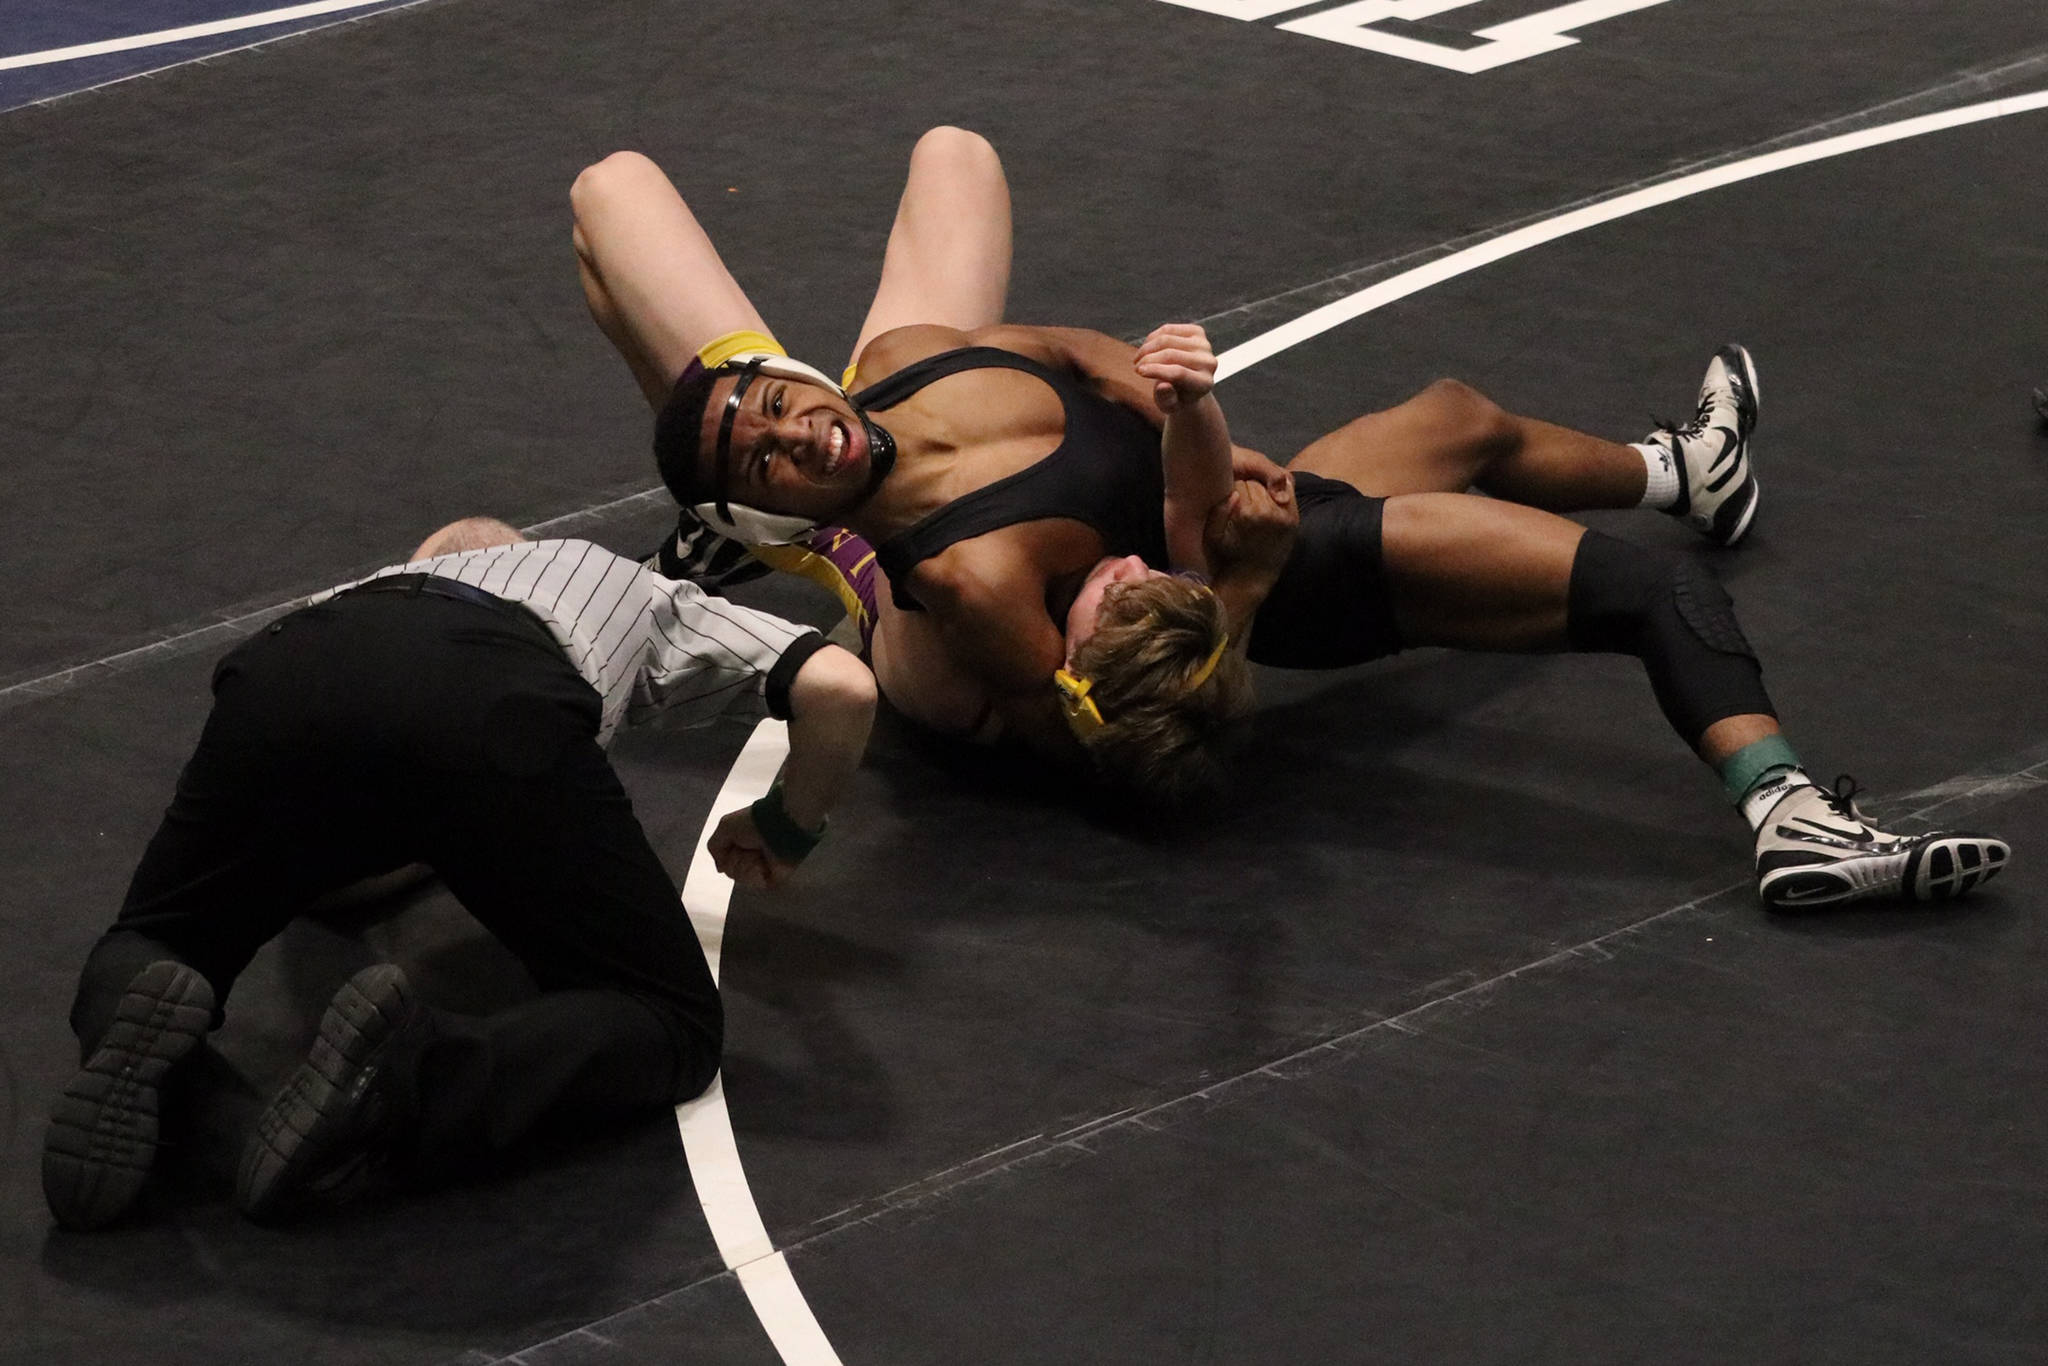 Juneau-Douglas High School senior Jahrease Mays, wrestling for Thunder Mountain, pins Lathrop High School’s Colton Parduhn in the 125-pound semifinals match at the ASAA Division I state meet at the Alaska Airlines Center in Anchorage on Saturday, Dec. 22, 2019. Mays placed second overall in the 125-pound weight class. (Courtesy Photo | Kristie Erickson)